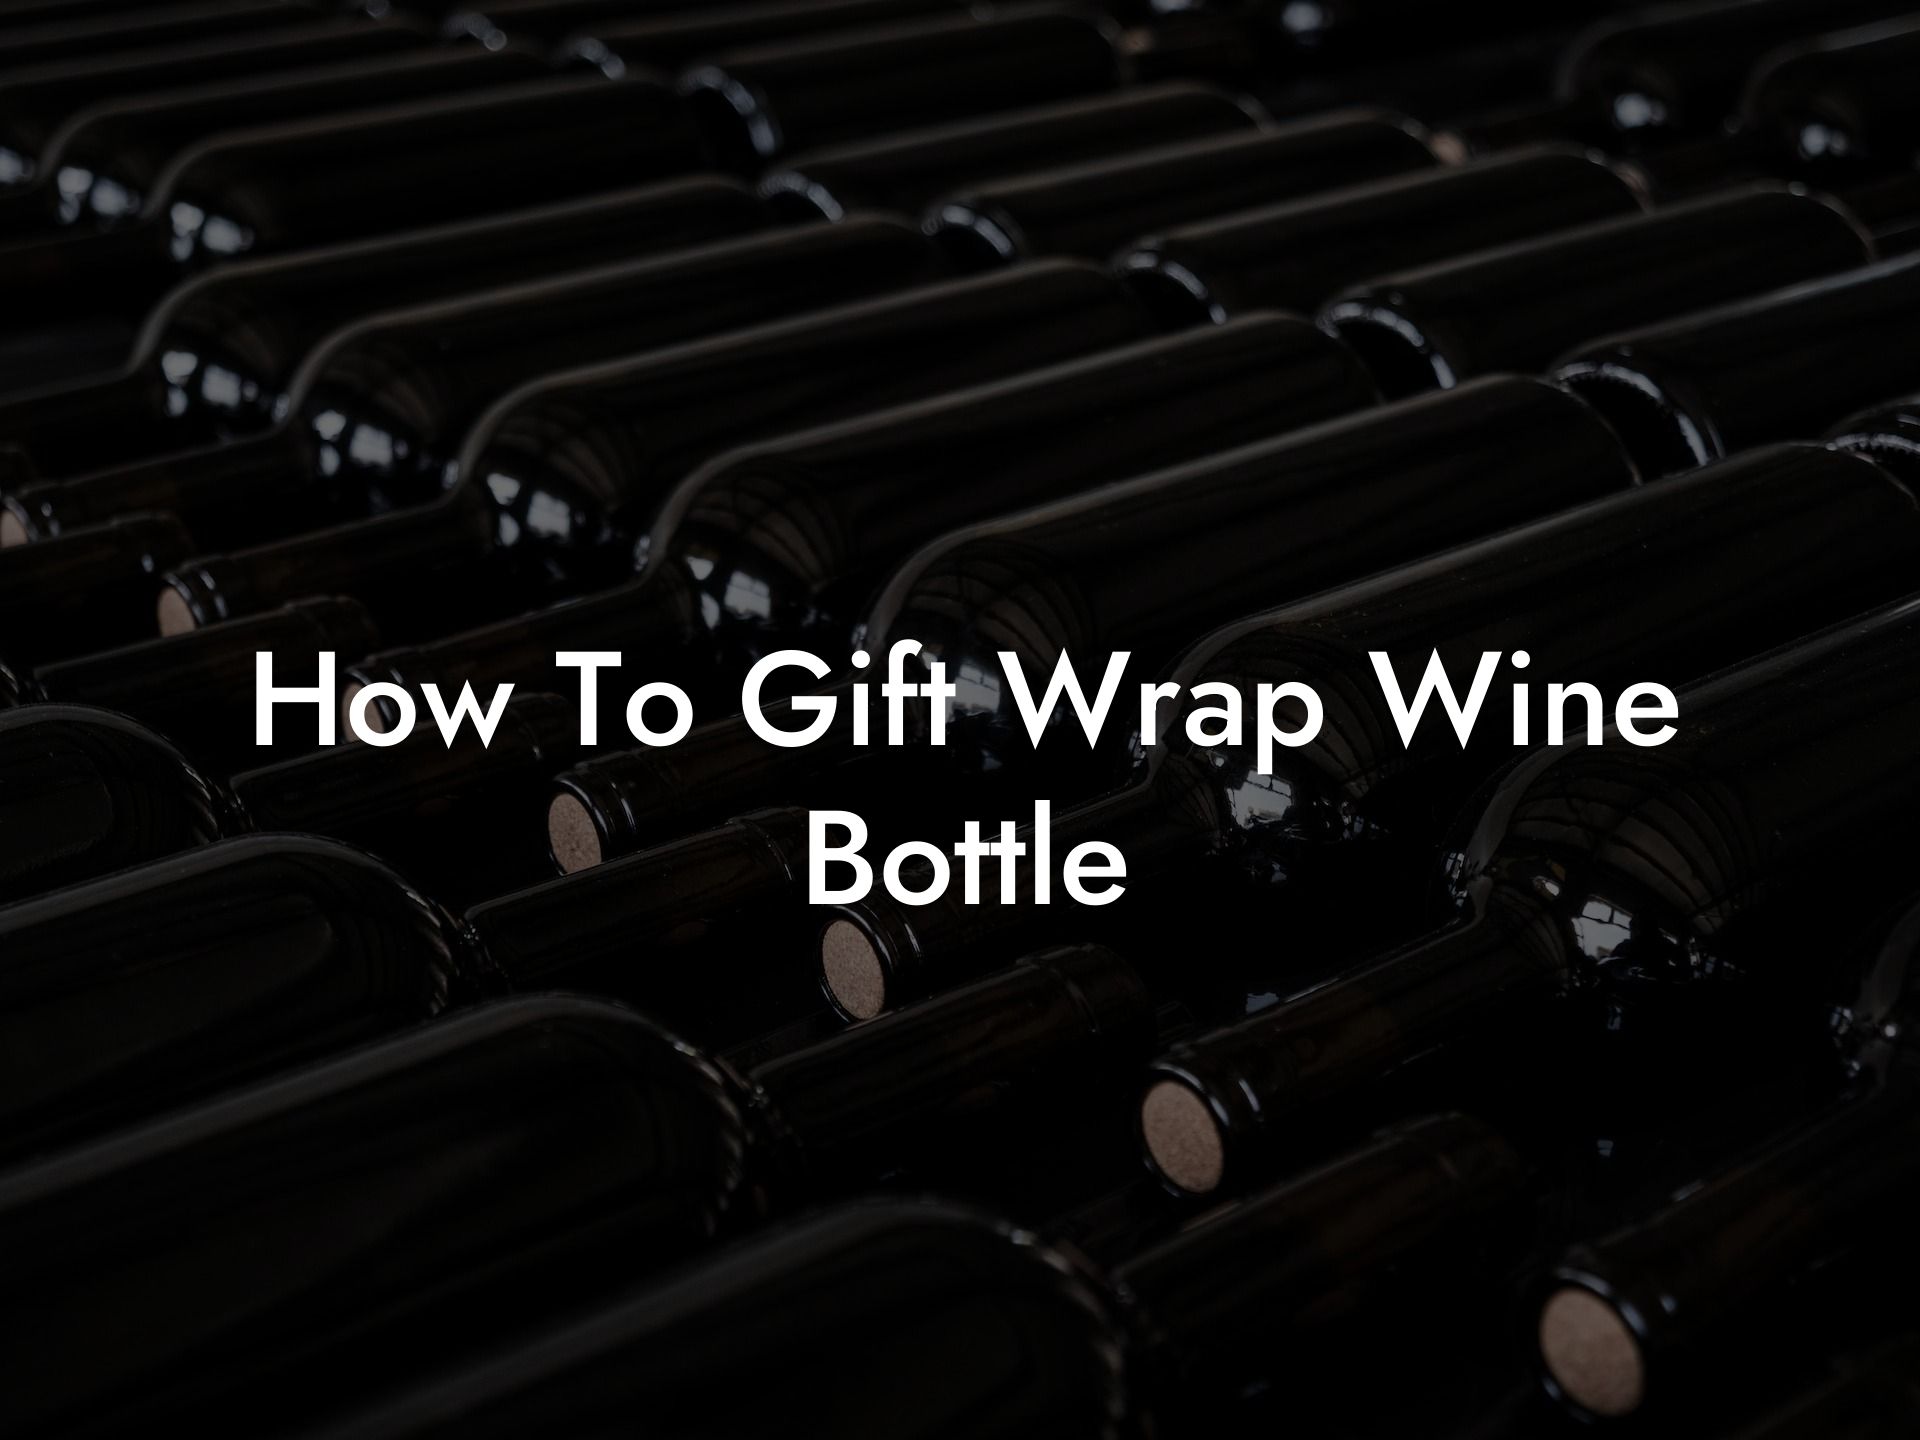 How To Gift Wrap Wine Bottle